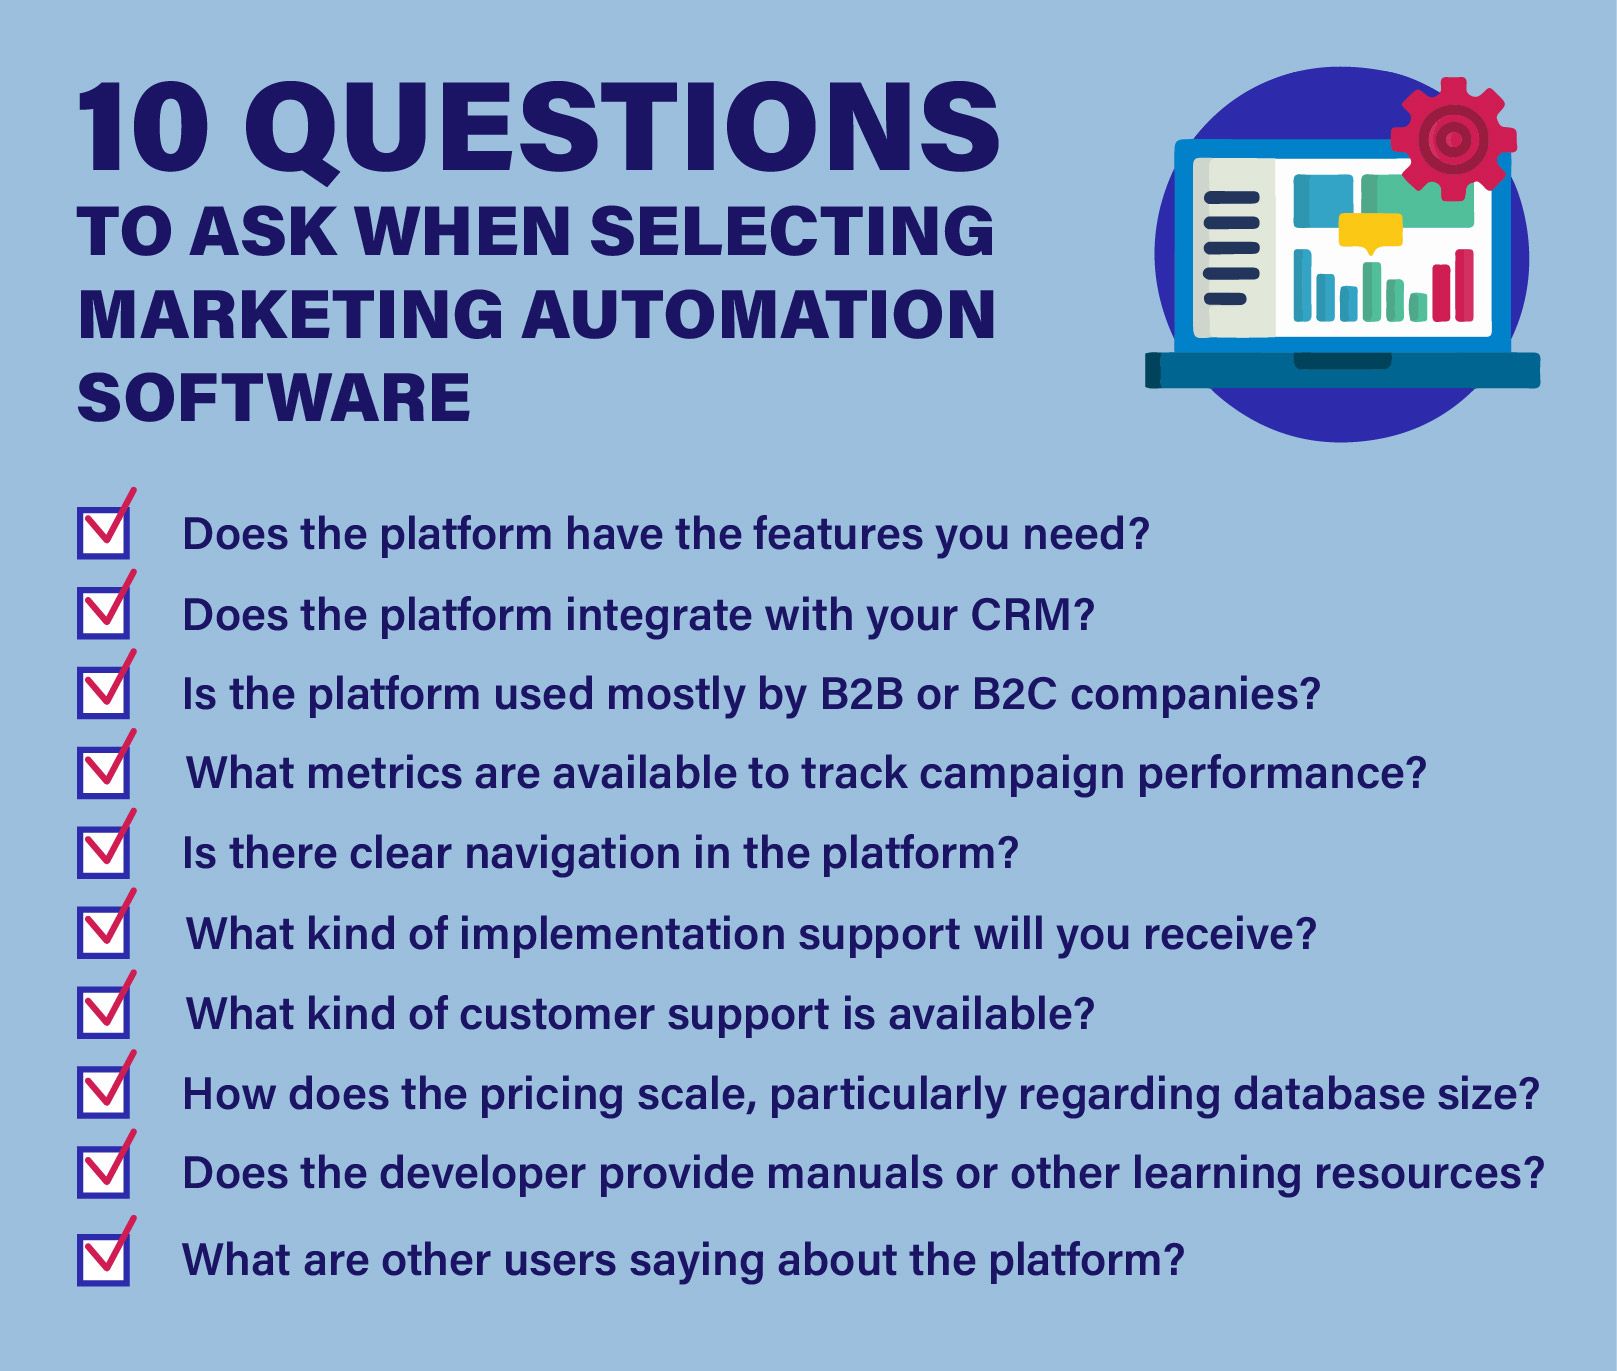 10 questions to ask when choosing a marketing automation platform